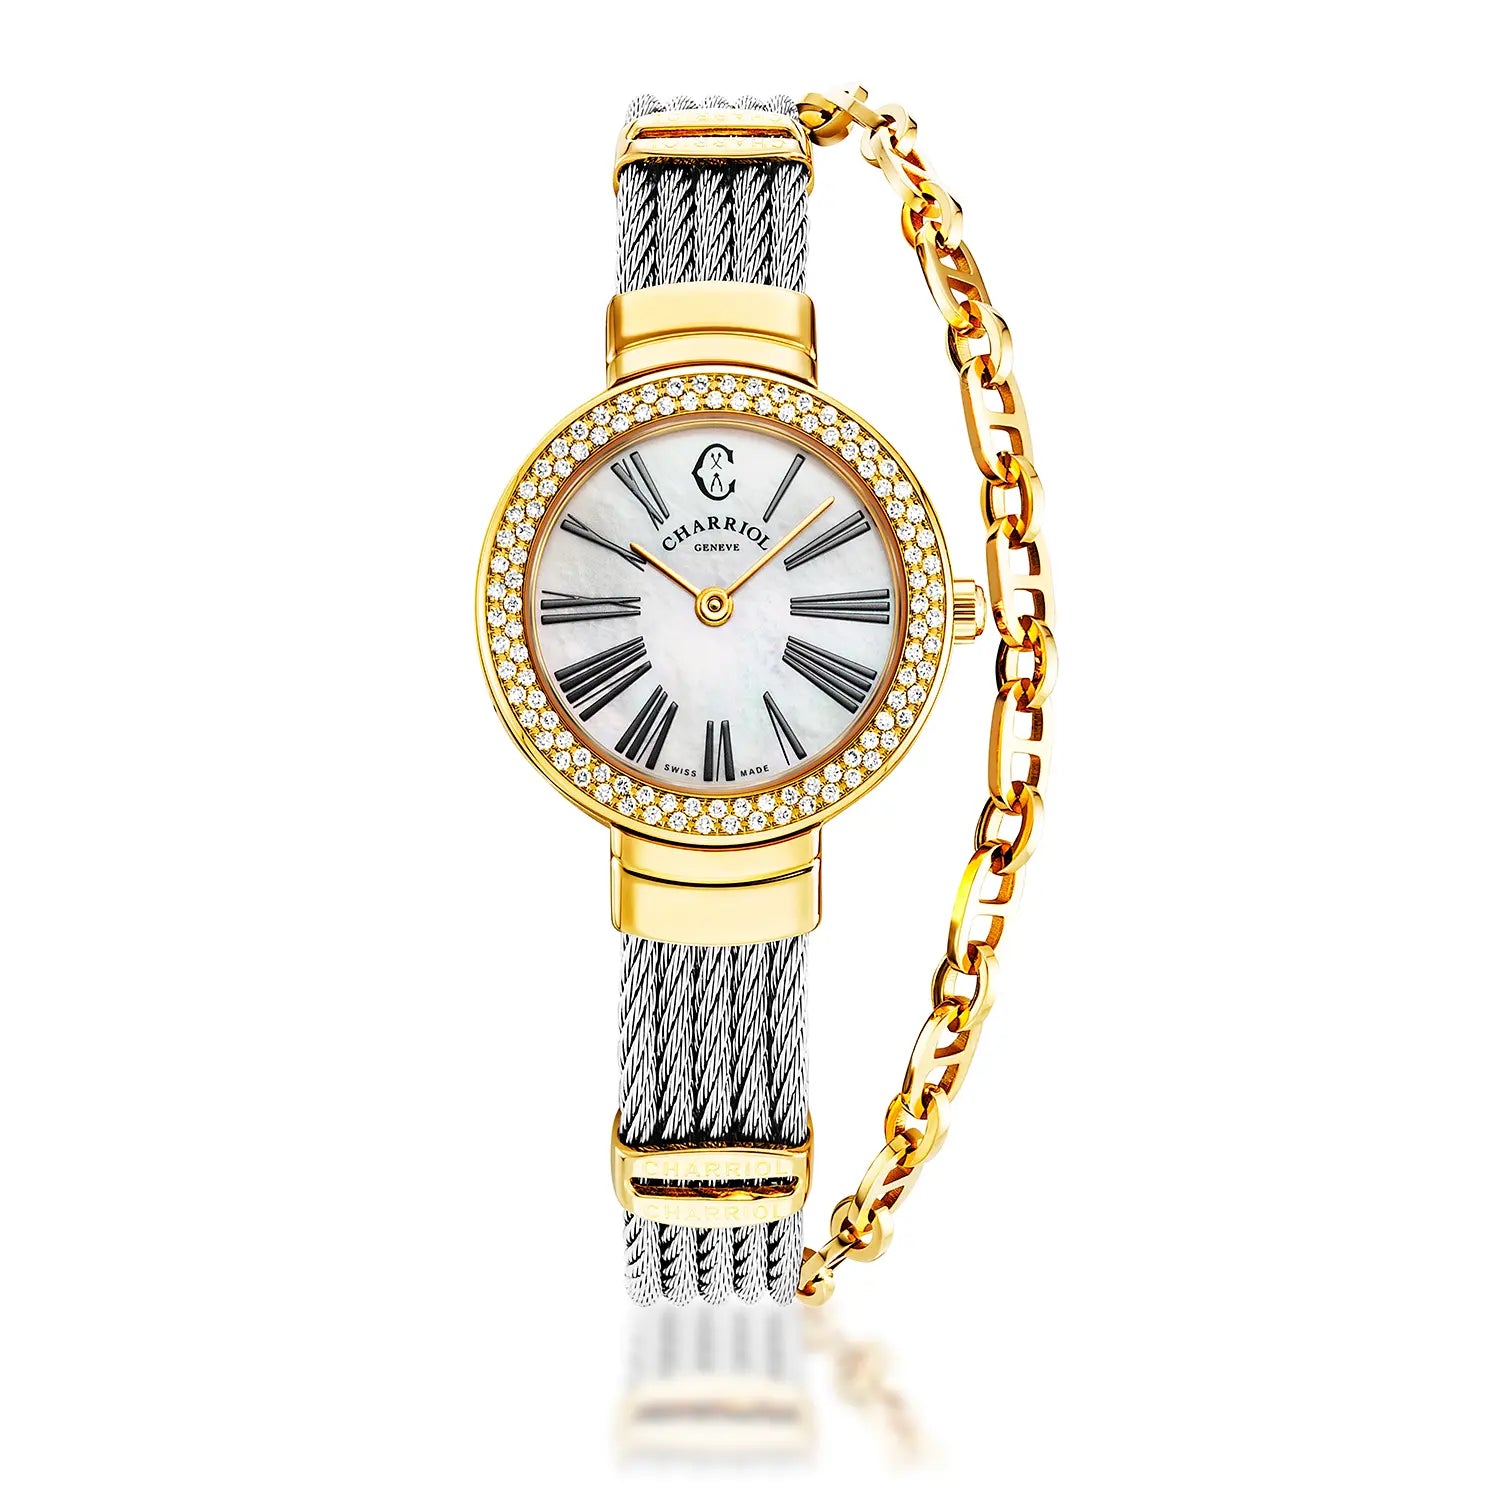 ST TROPEZ, 25MM, QUARTZ CALIBRE, WHITE MOTHER-OF-PEARL WITH ROMAN NUMERALS DIAL, YELLOW GOLD PVD WITH 104 DIAMONDS BEZEL, STEEL CABLE BRACELET - Charriol Geneve -  Watch